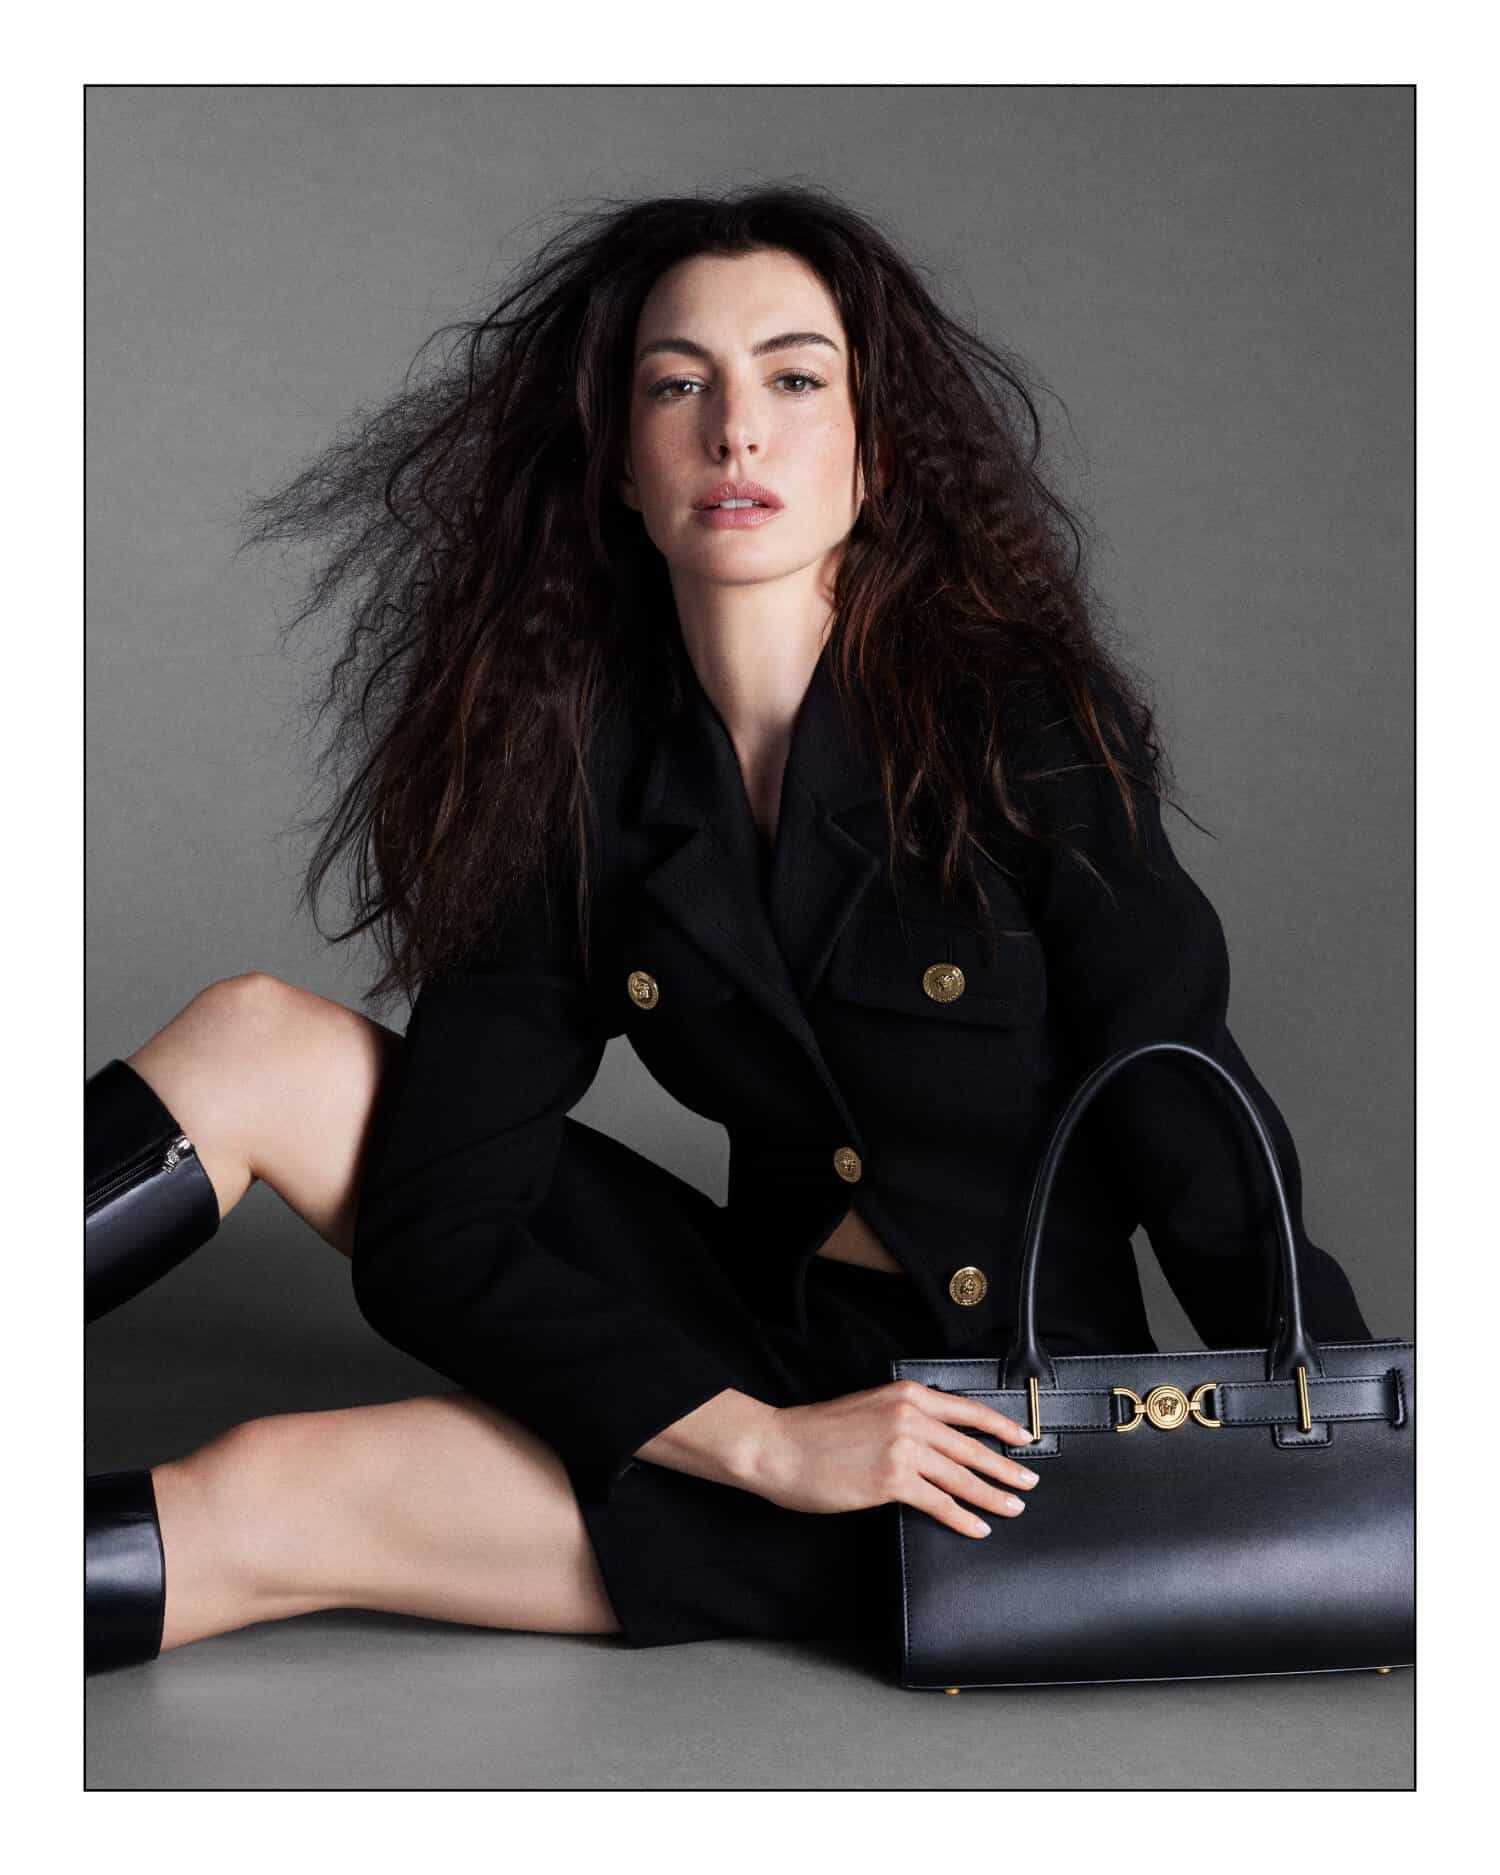 Anne Hathaway, Versace, Donatella Versace, campaigns, Mert and Marcus